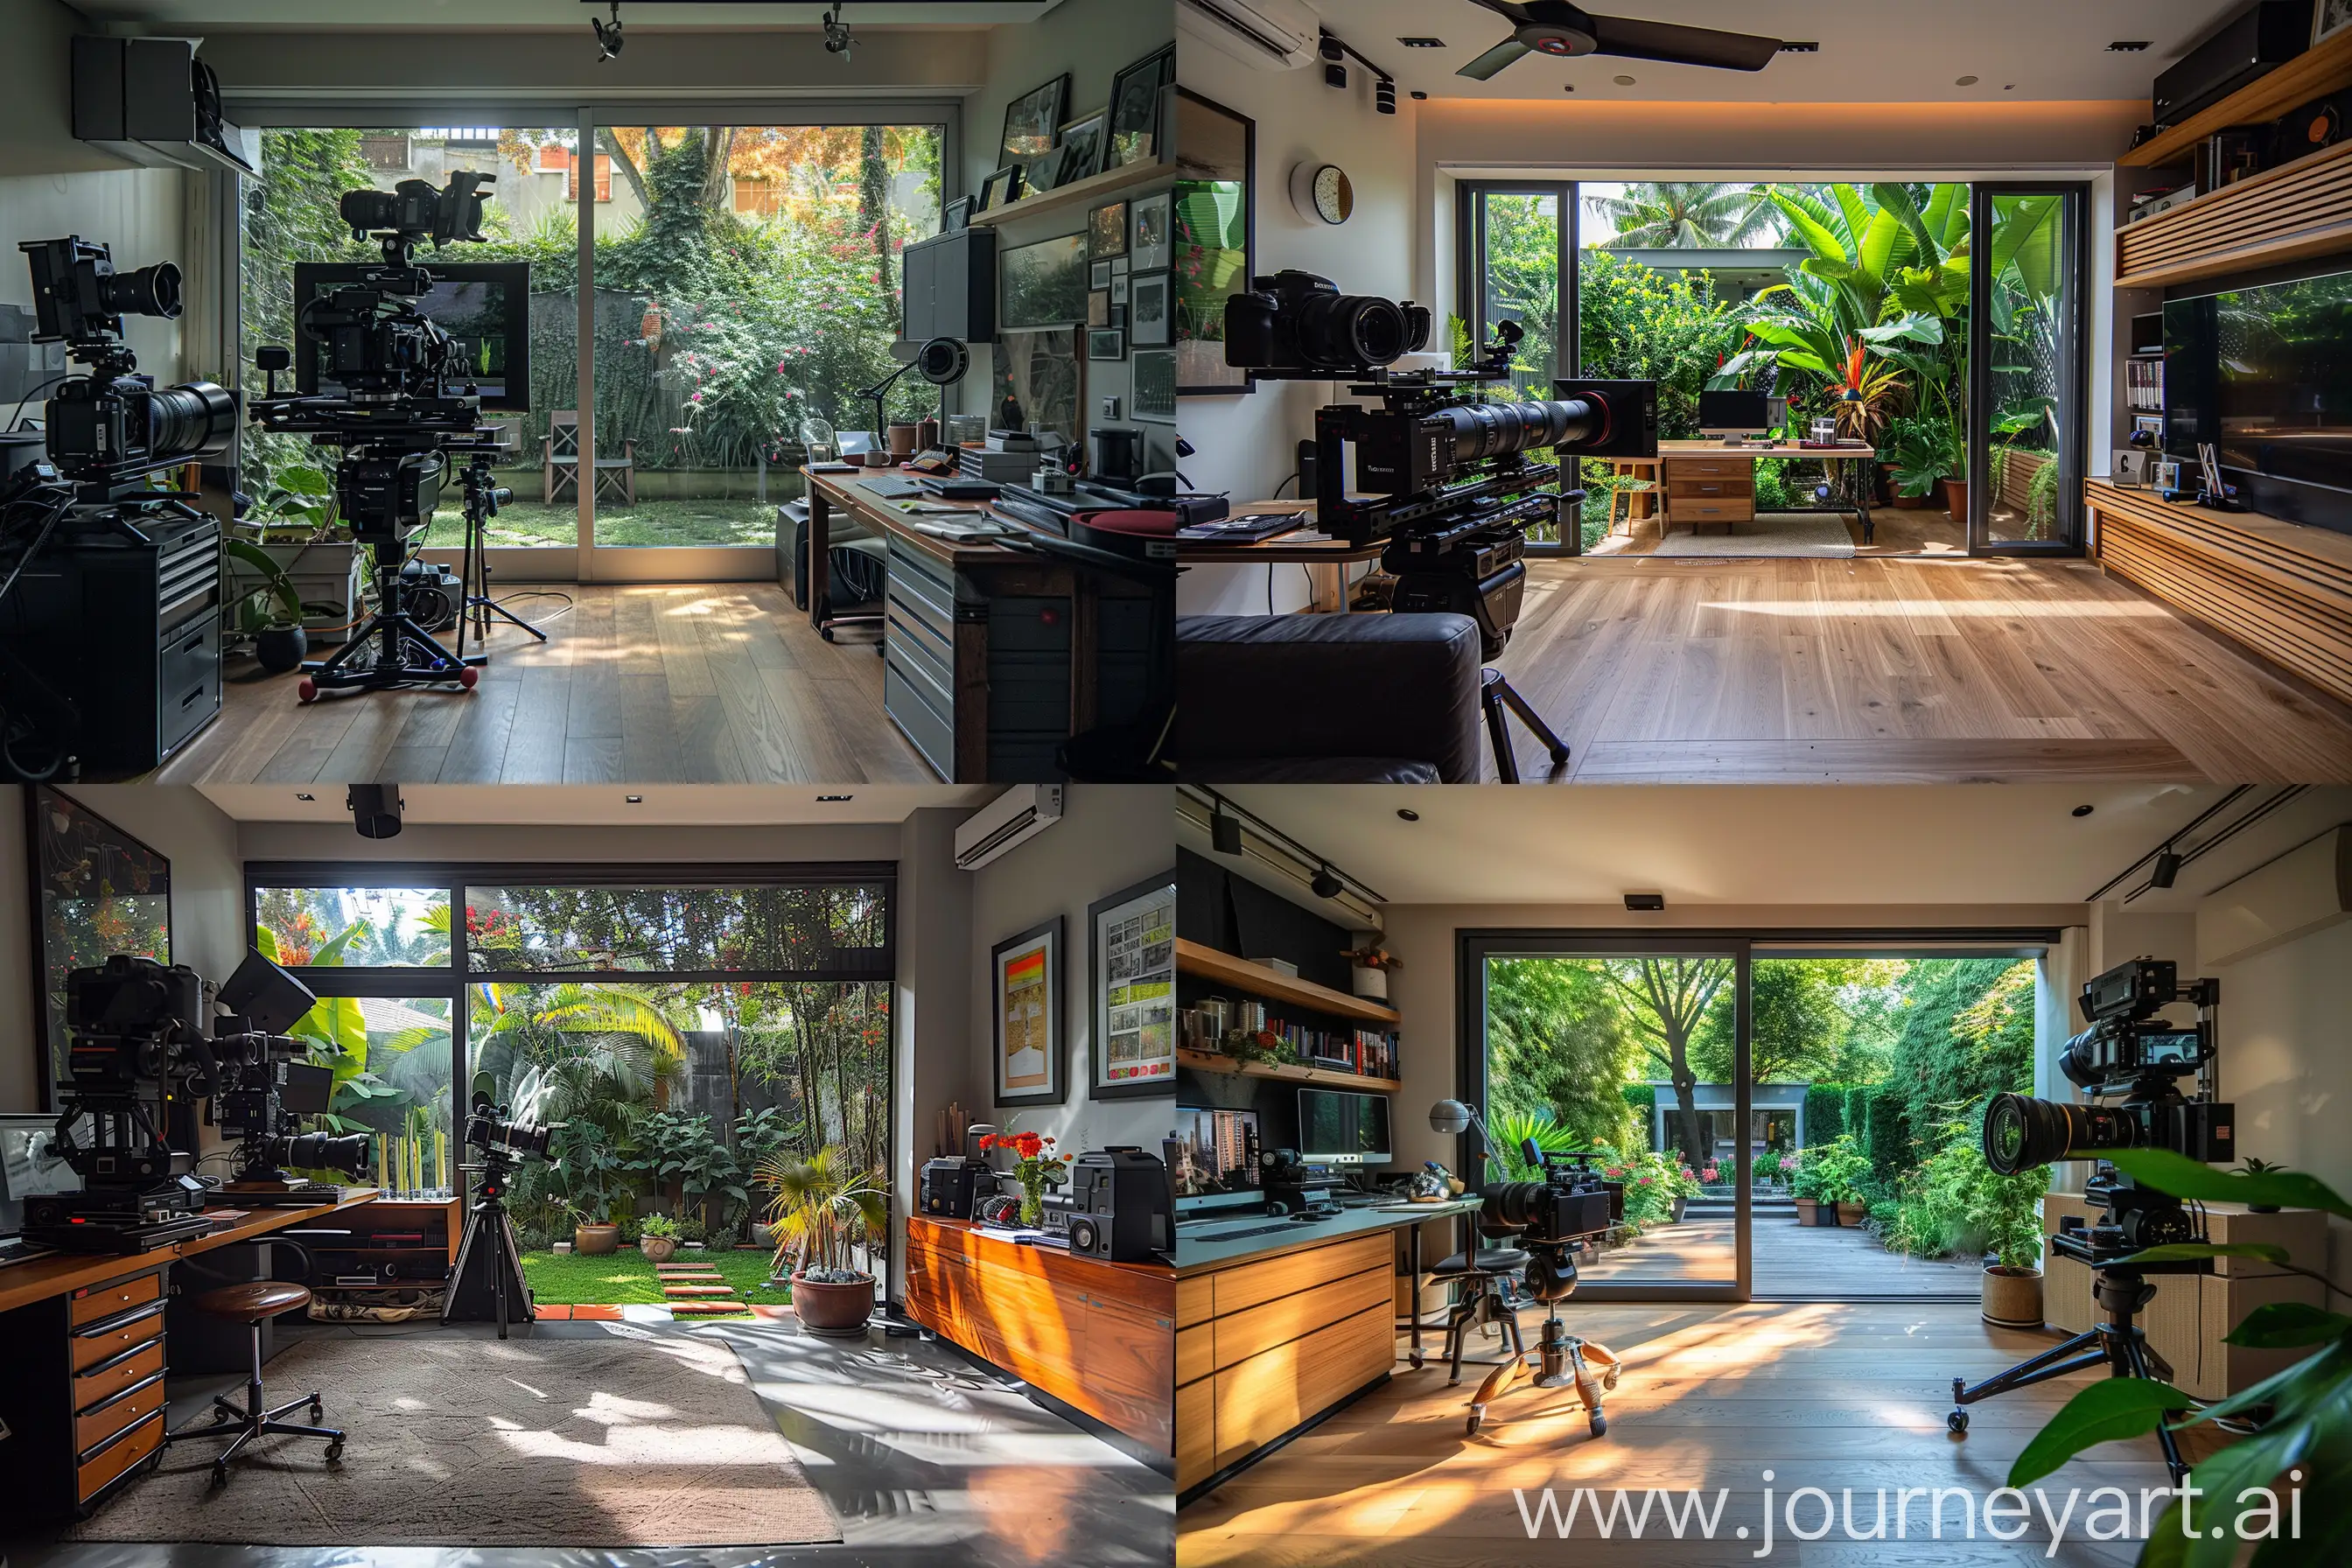 Photographers-Inviting-Workspace-with-Natural-Lighting-and-Verdant-Garden-Views